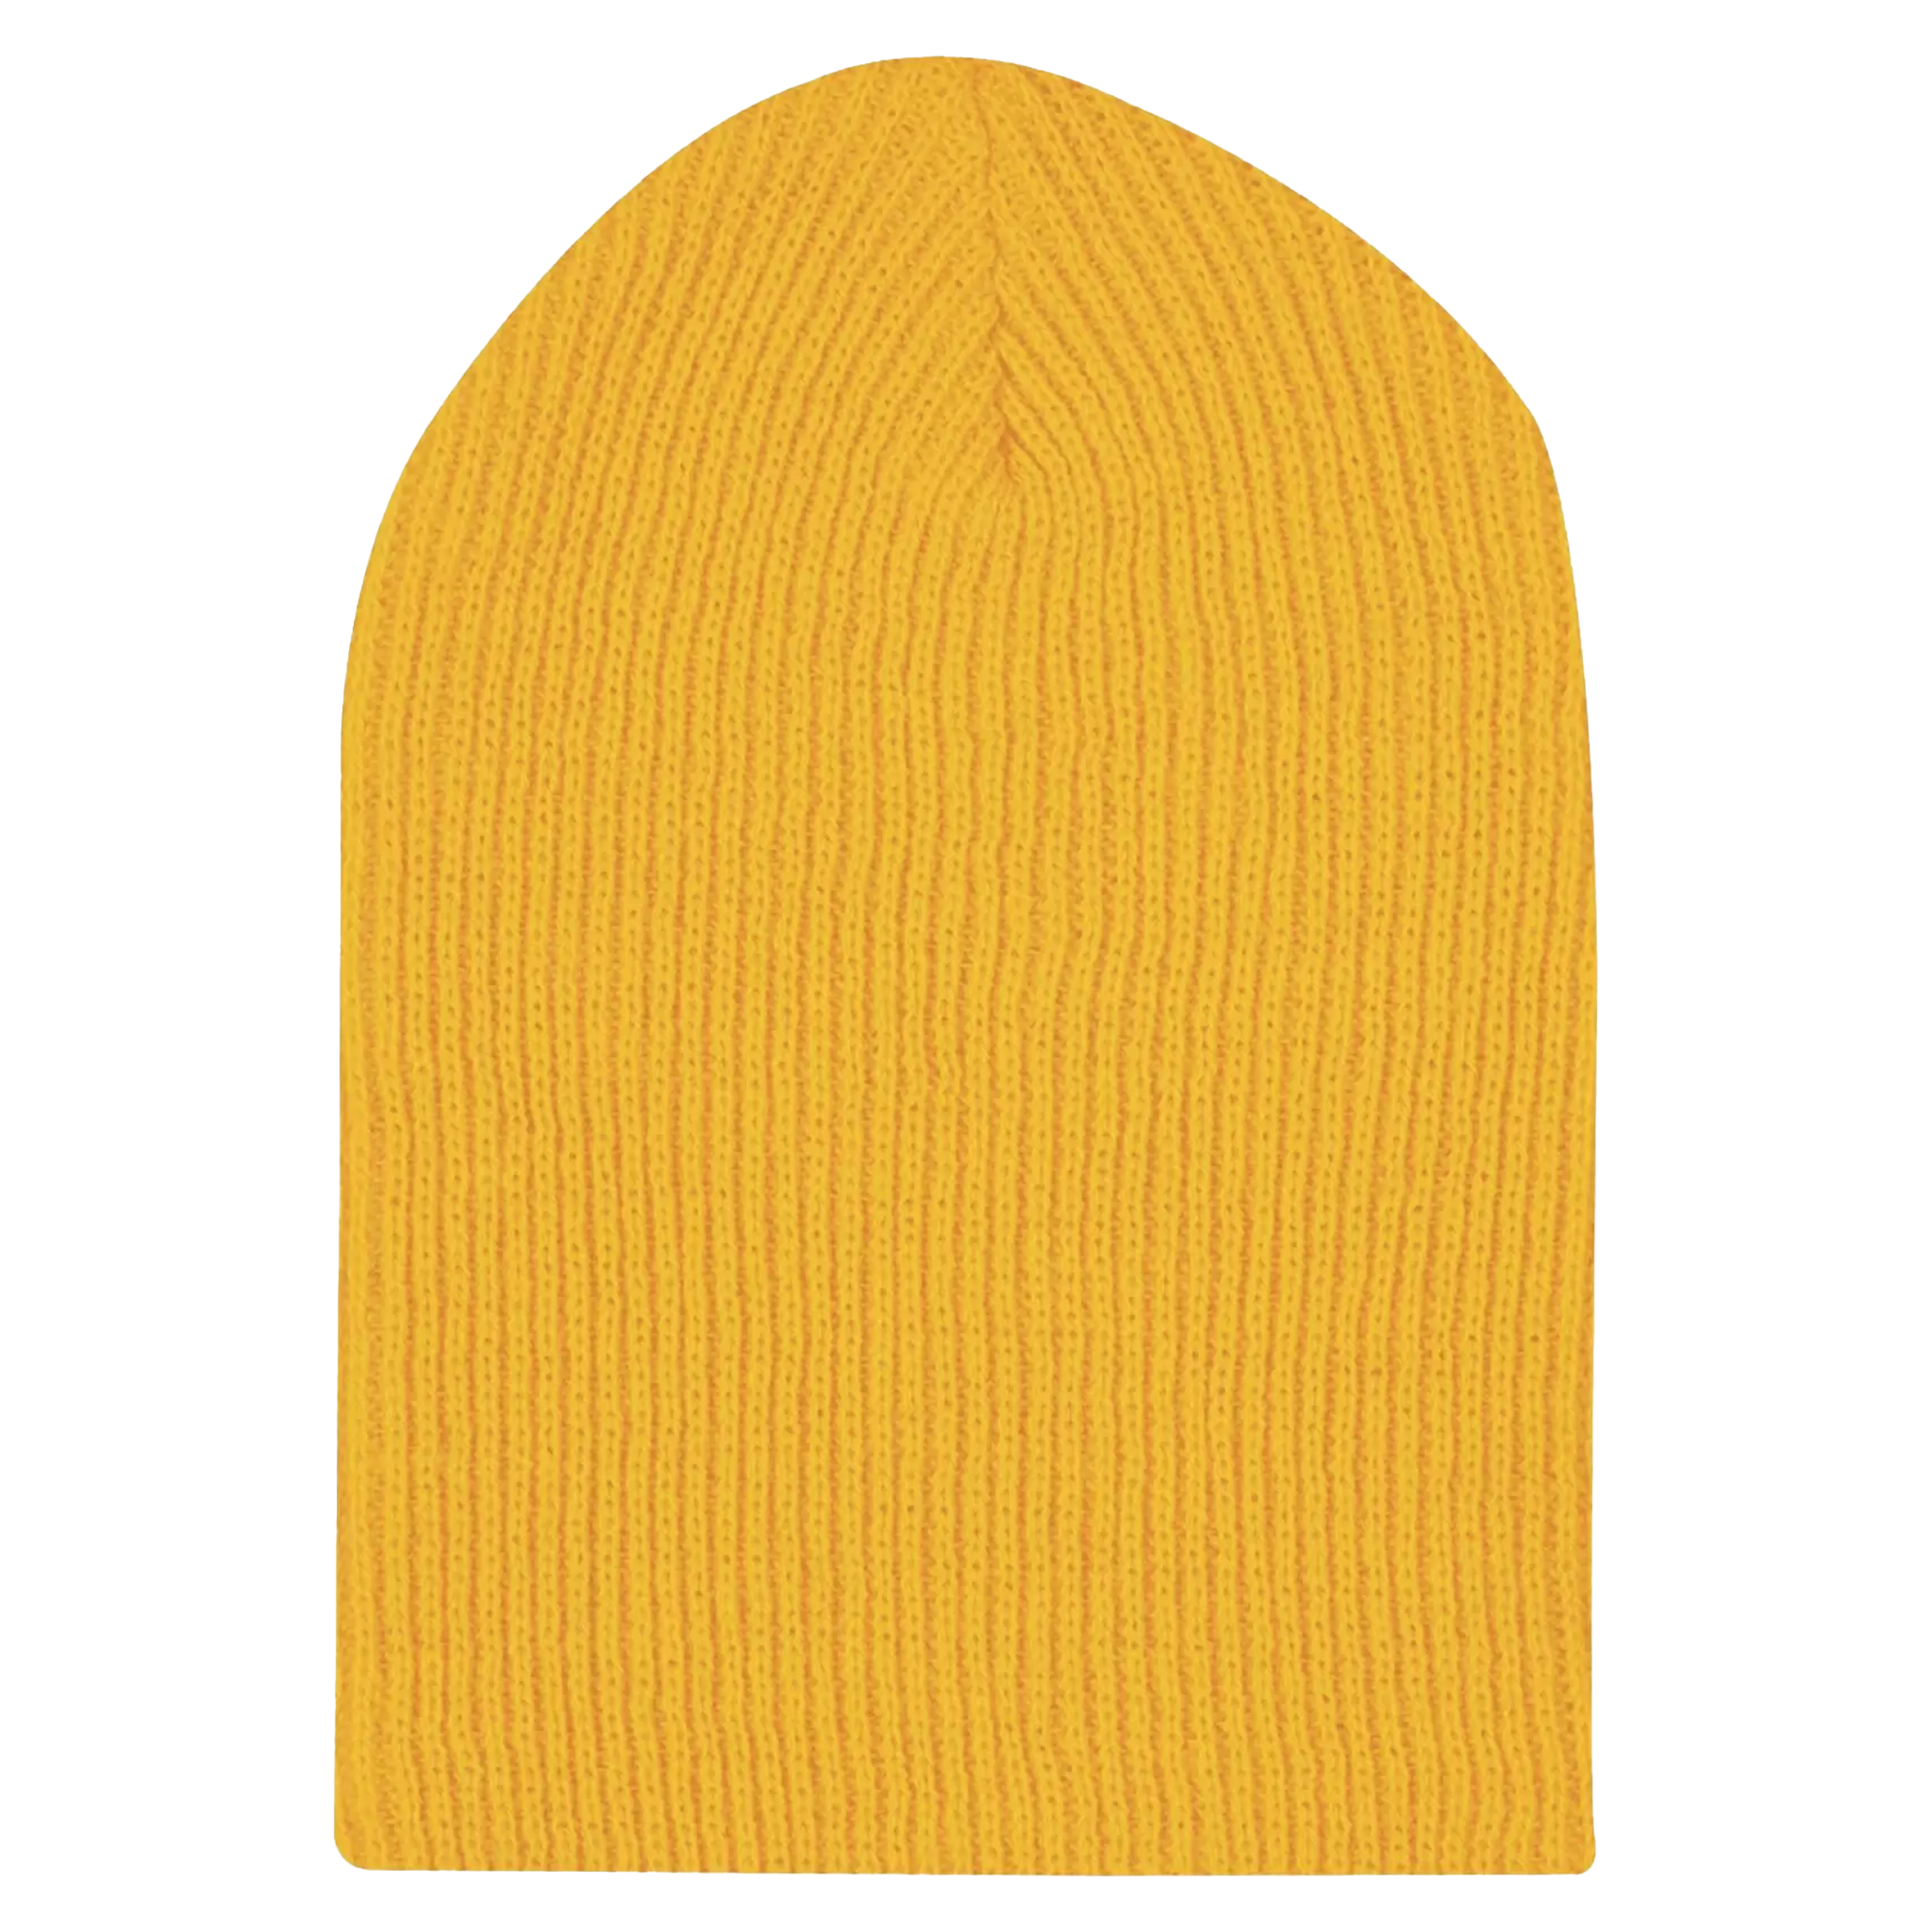 ATC Everyday Rib Knit Slouch Beanie - Adult Unisex One Size Fits All - Gold